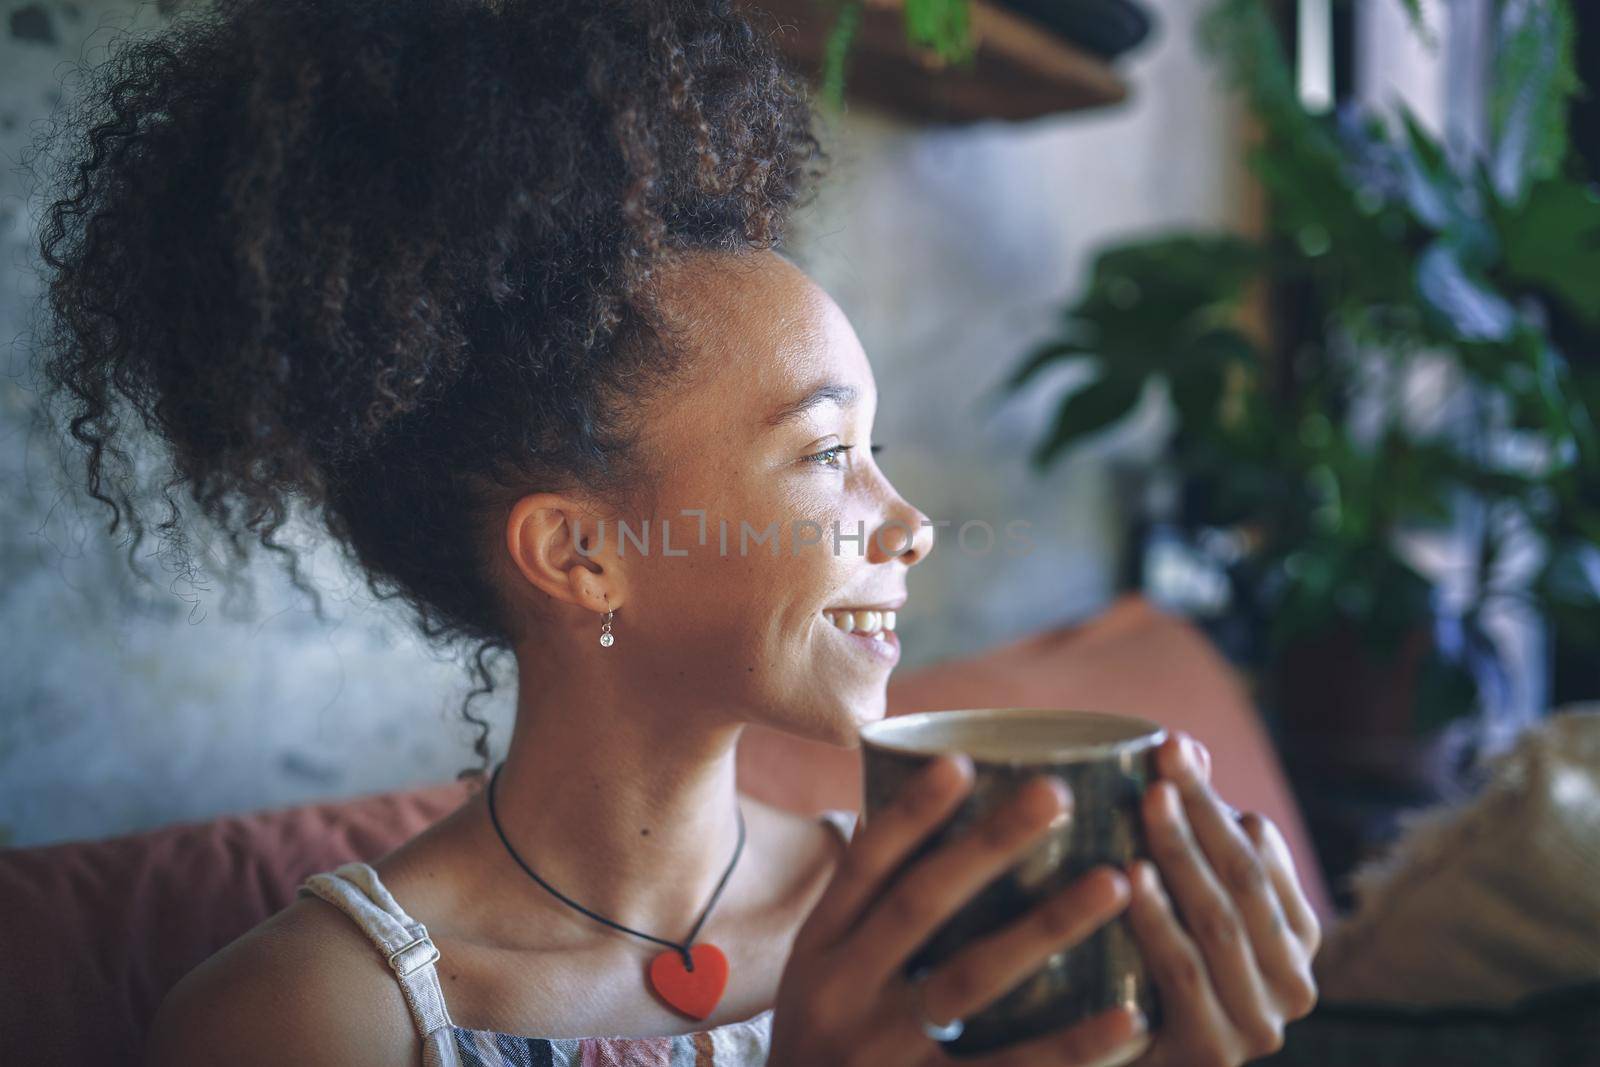 Shot of a beautiful African young woman enjoying a cup of coffee - Stock Photo